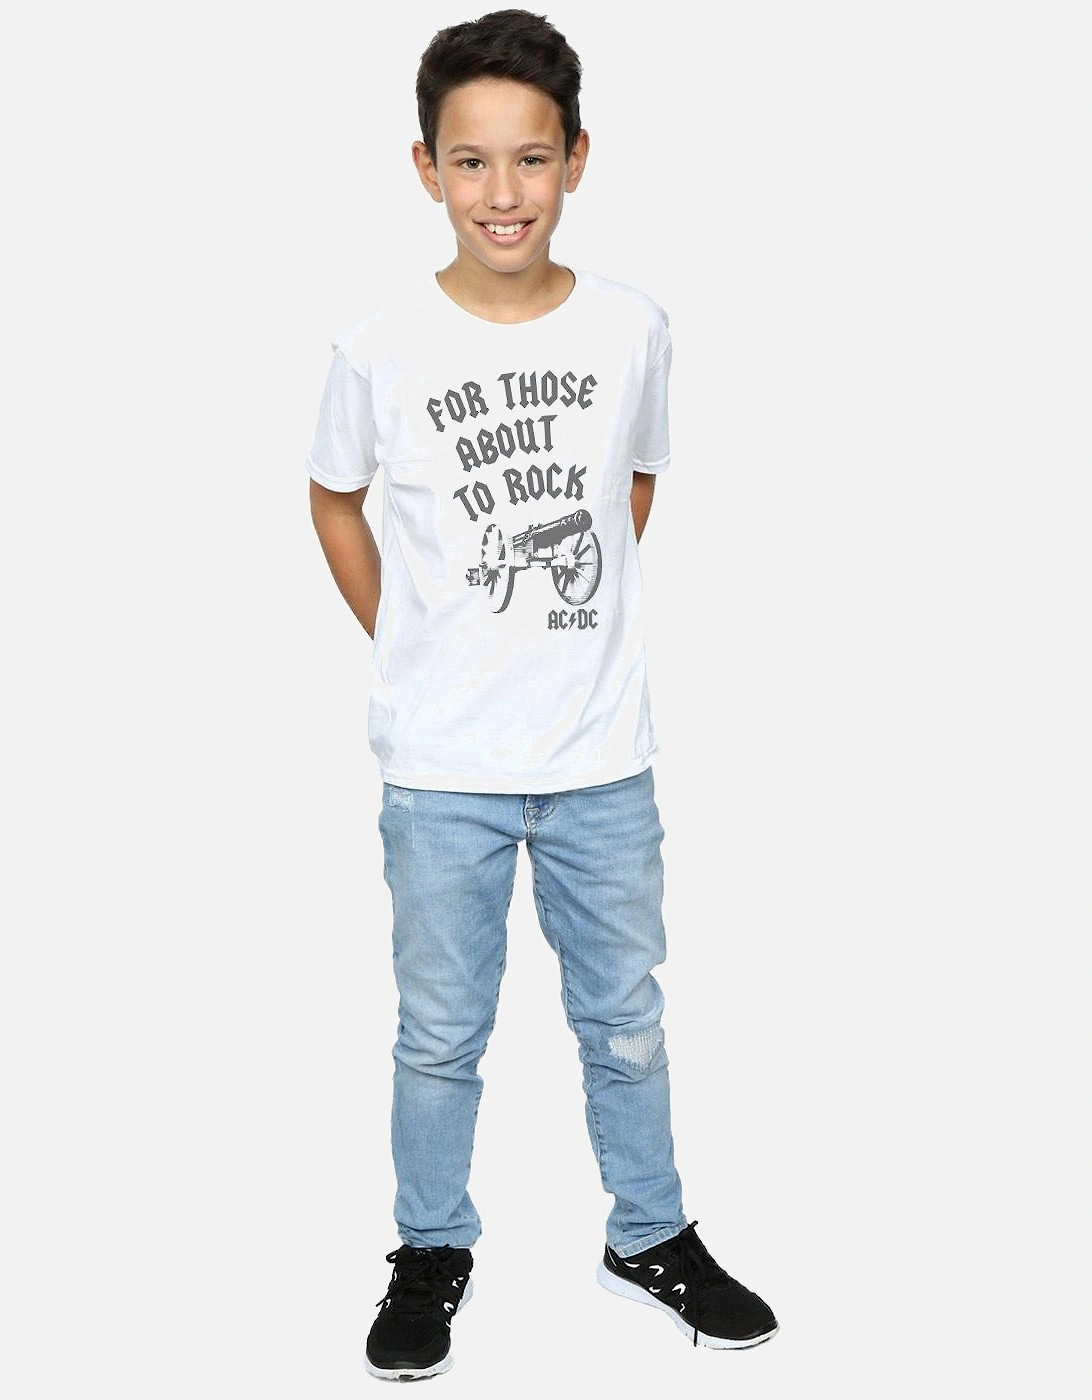 Boys For Those About To Rock Cannon T-Shirt